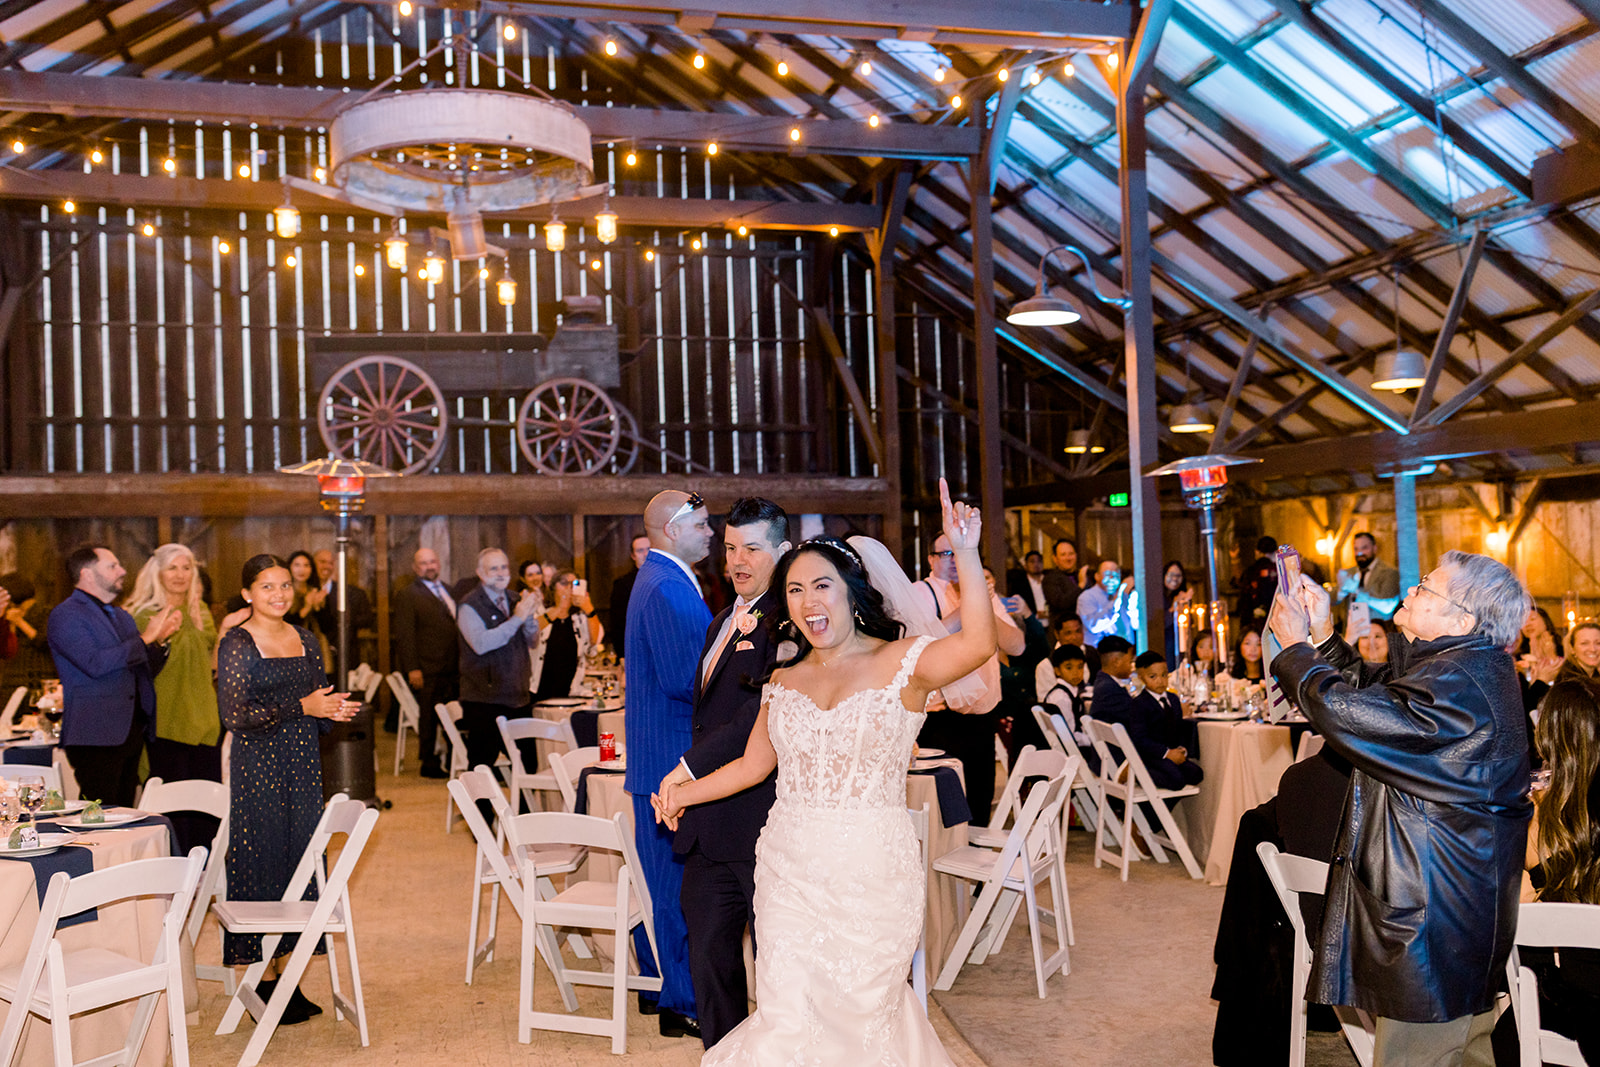 The dance floor comes alive with energy as the couple celebrates their union with family and friends